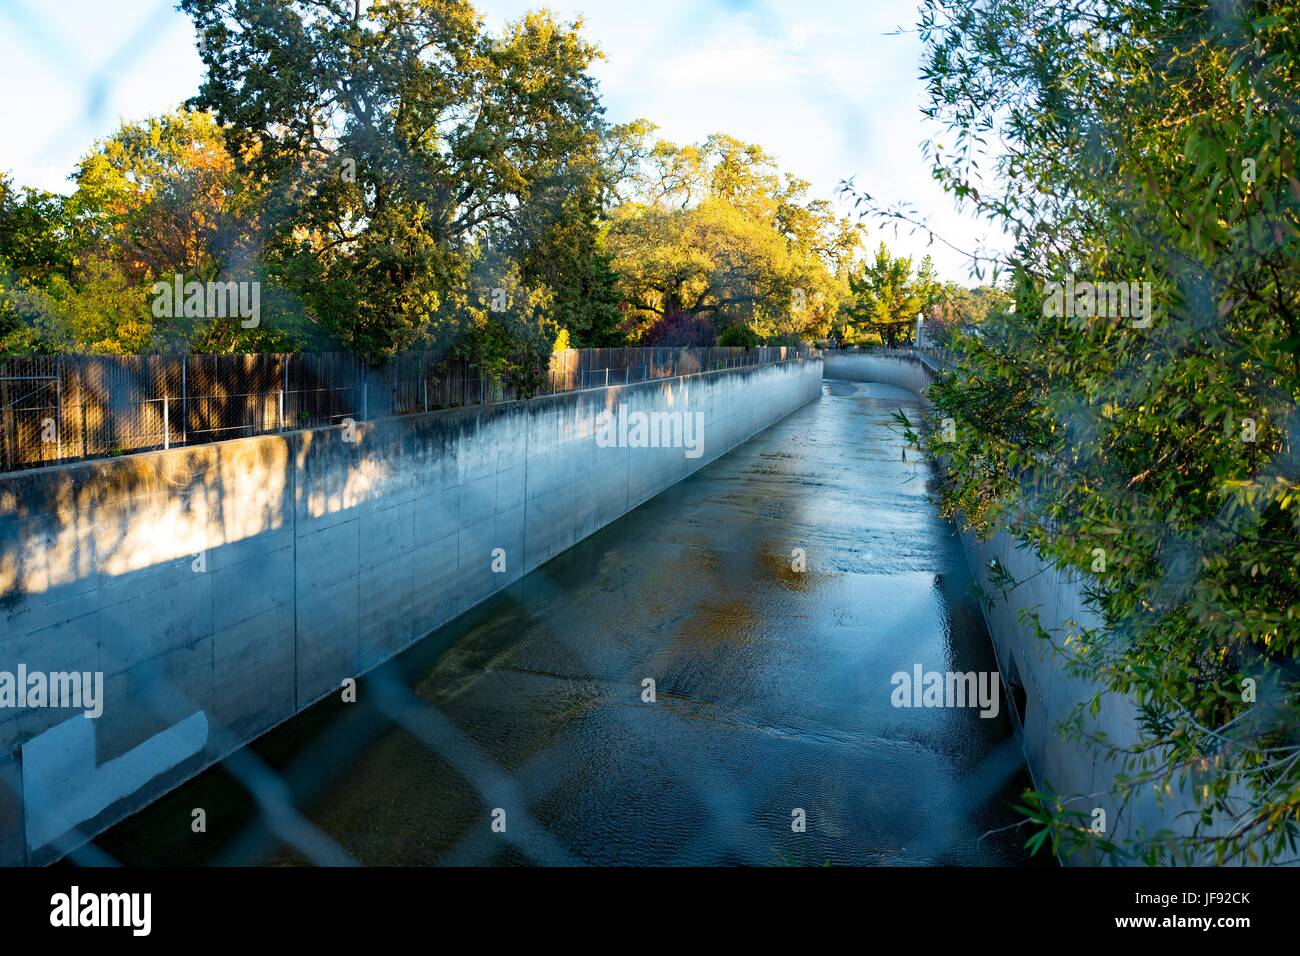 A concrete rainwater canal is visible, with flowing water, through a chainlink fence, October 19, 2016. Stock Photo